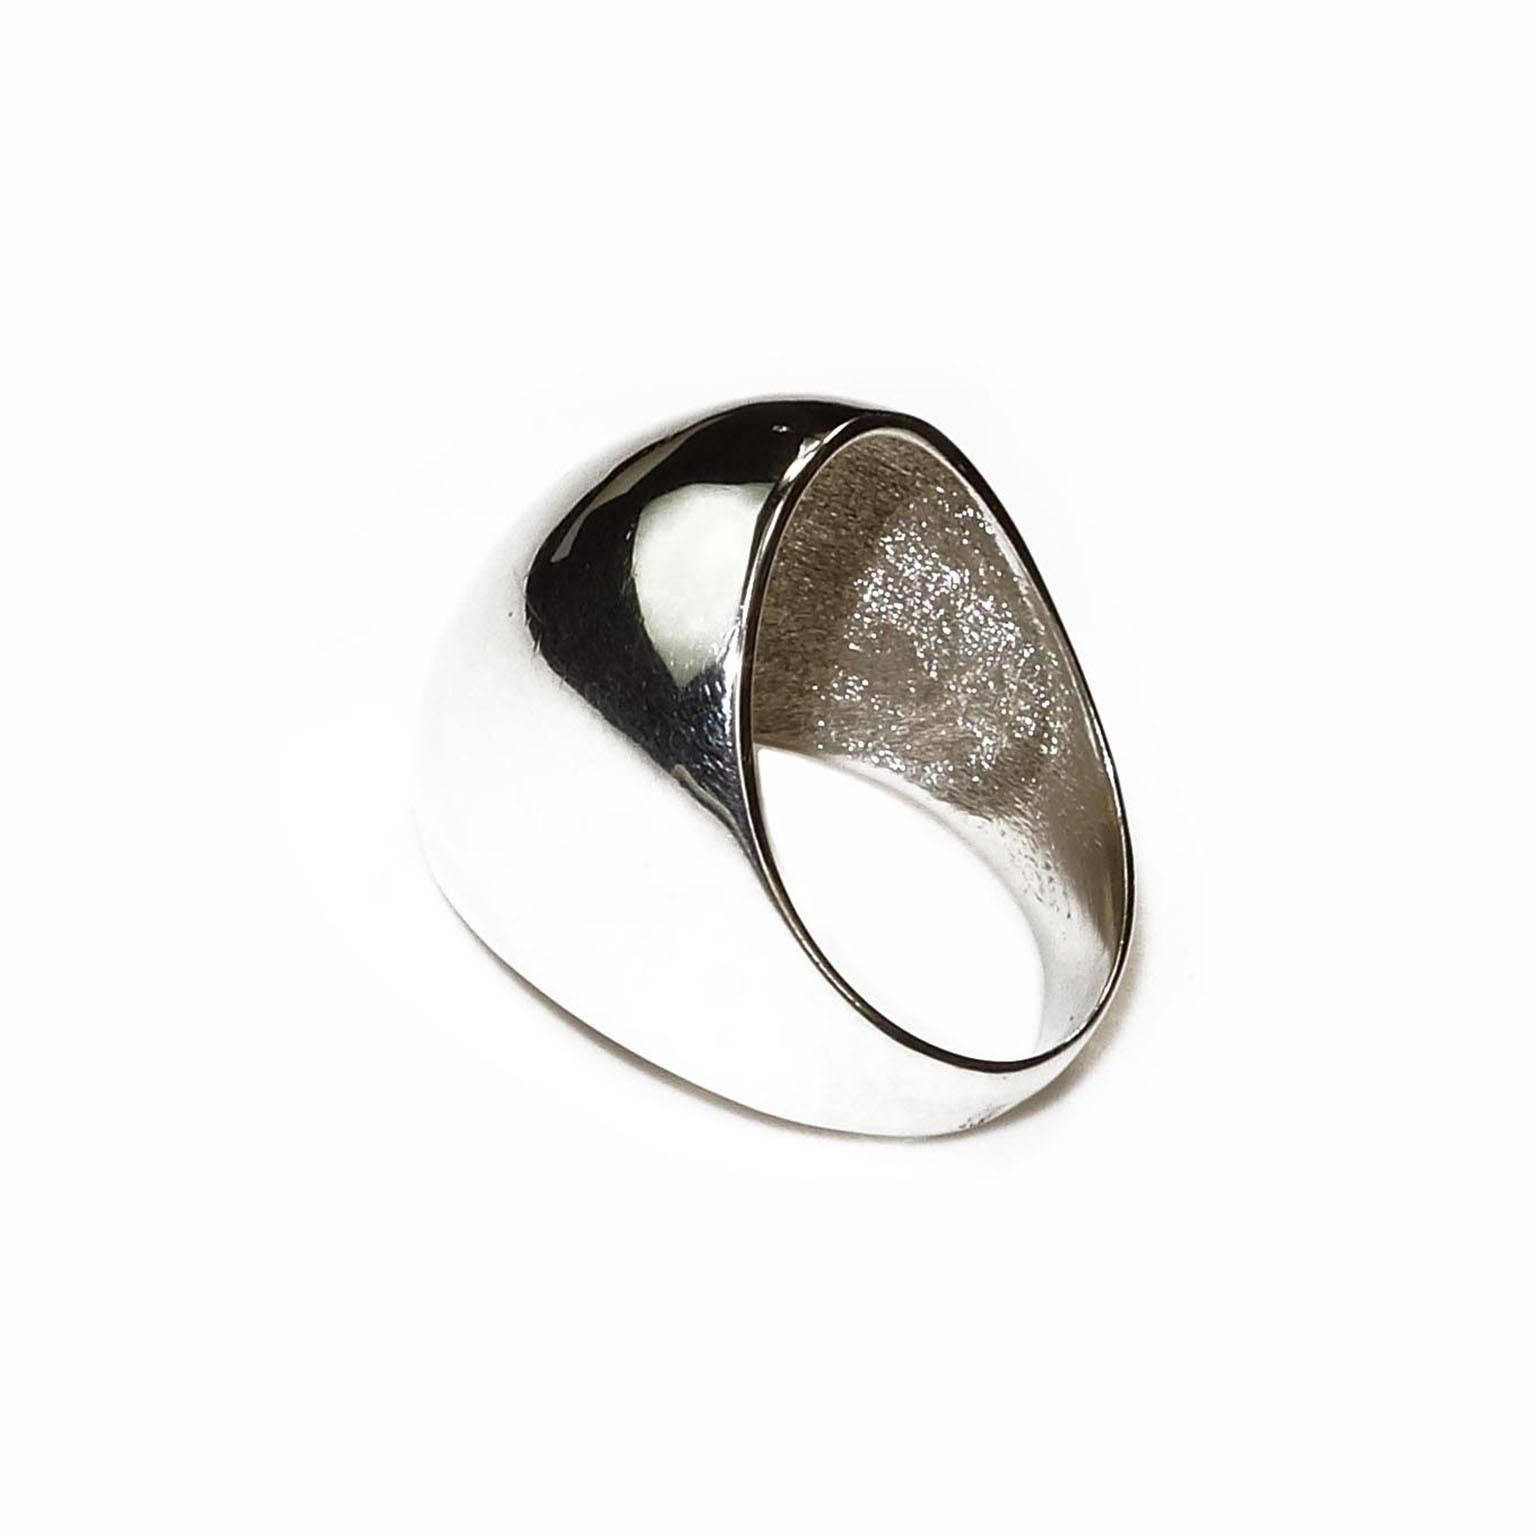 Contemporary AJD Modernist Sterling Silver Dome Ring